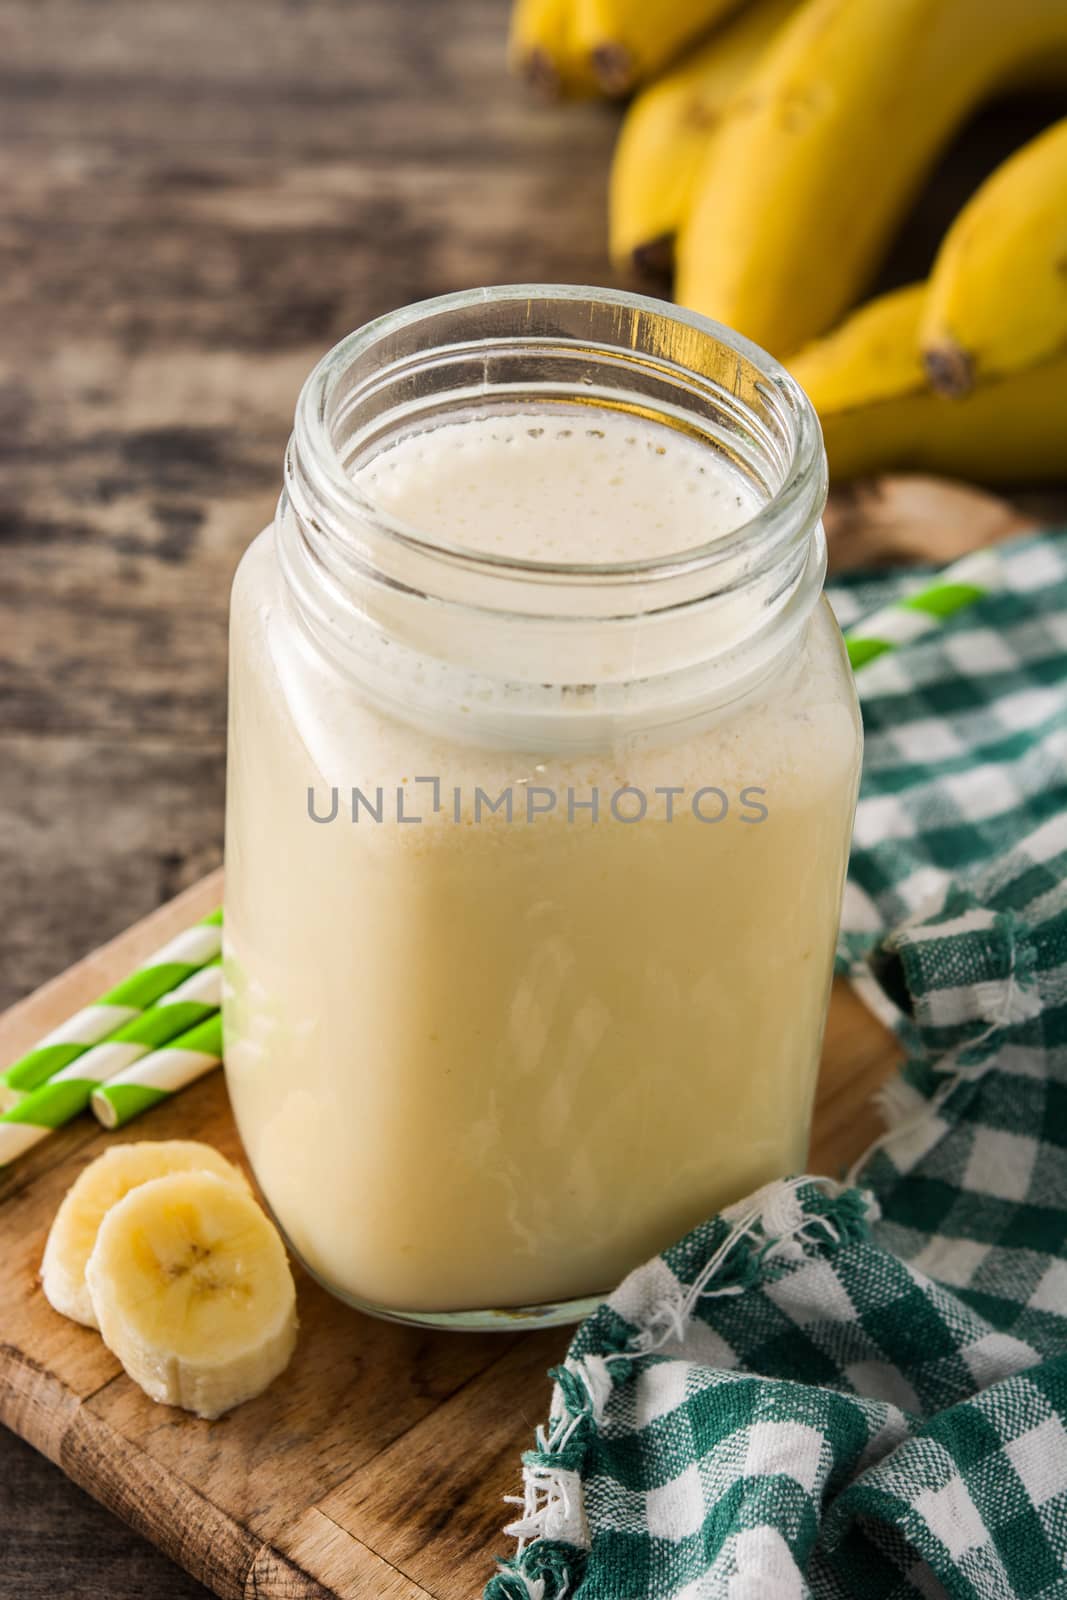 Banana smoothie by chandlervid85